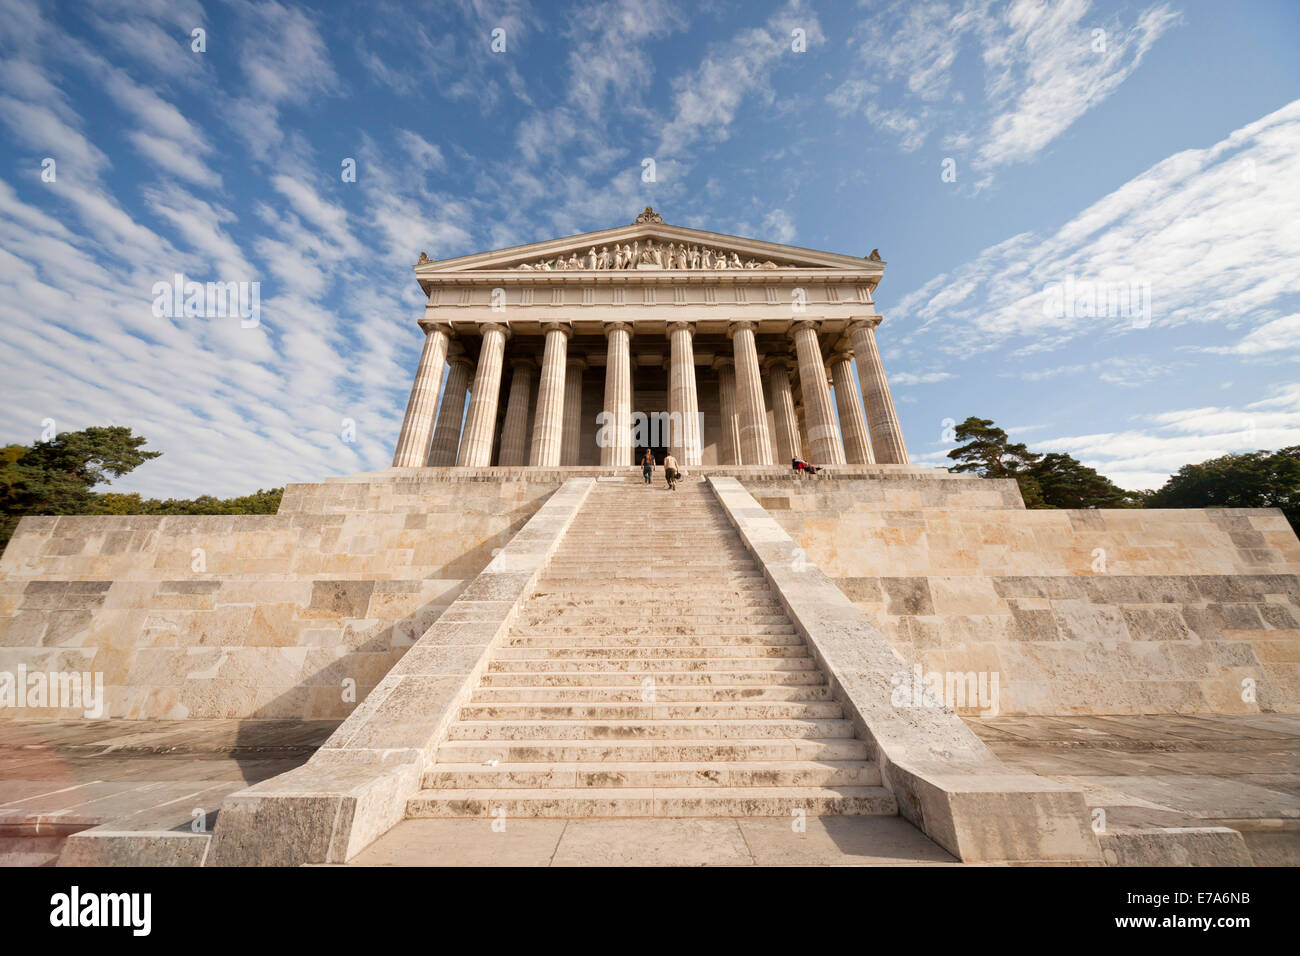 greek style neo-classical building of the Walhalla memorial above the Danube River, east of Regensburg, Bavaria, Germany, Europe Stock Photo